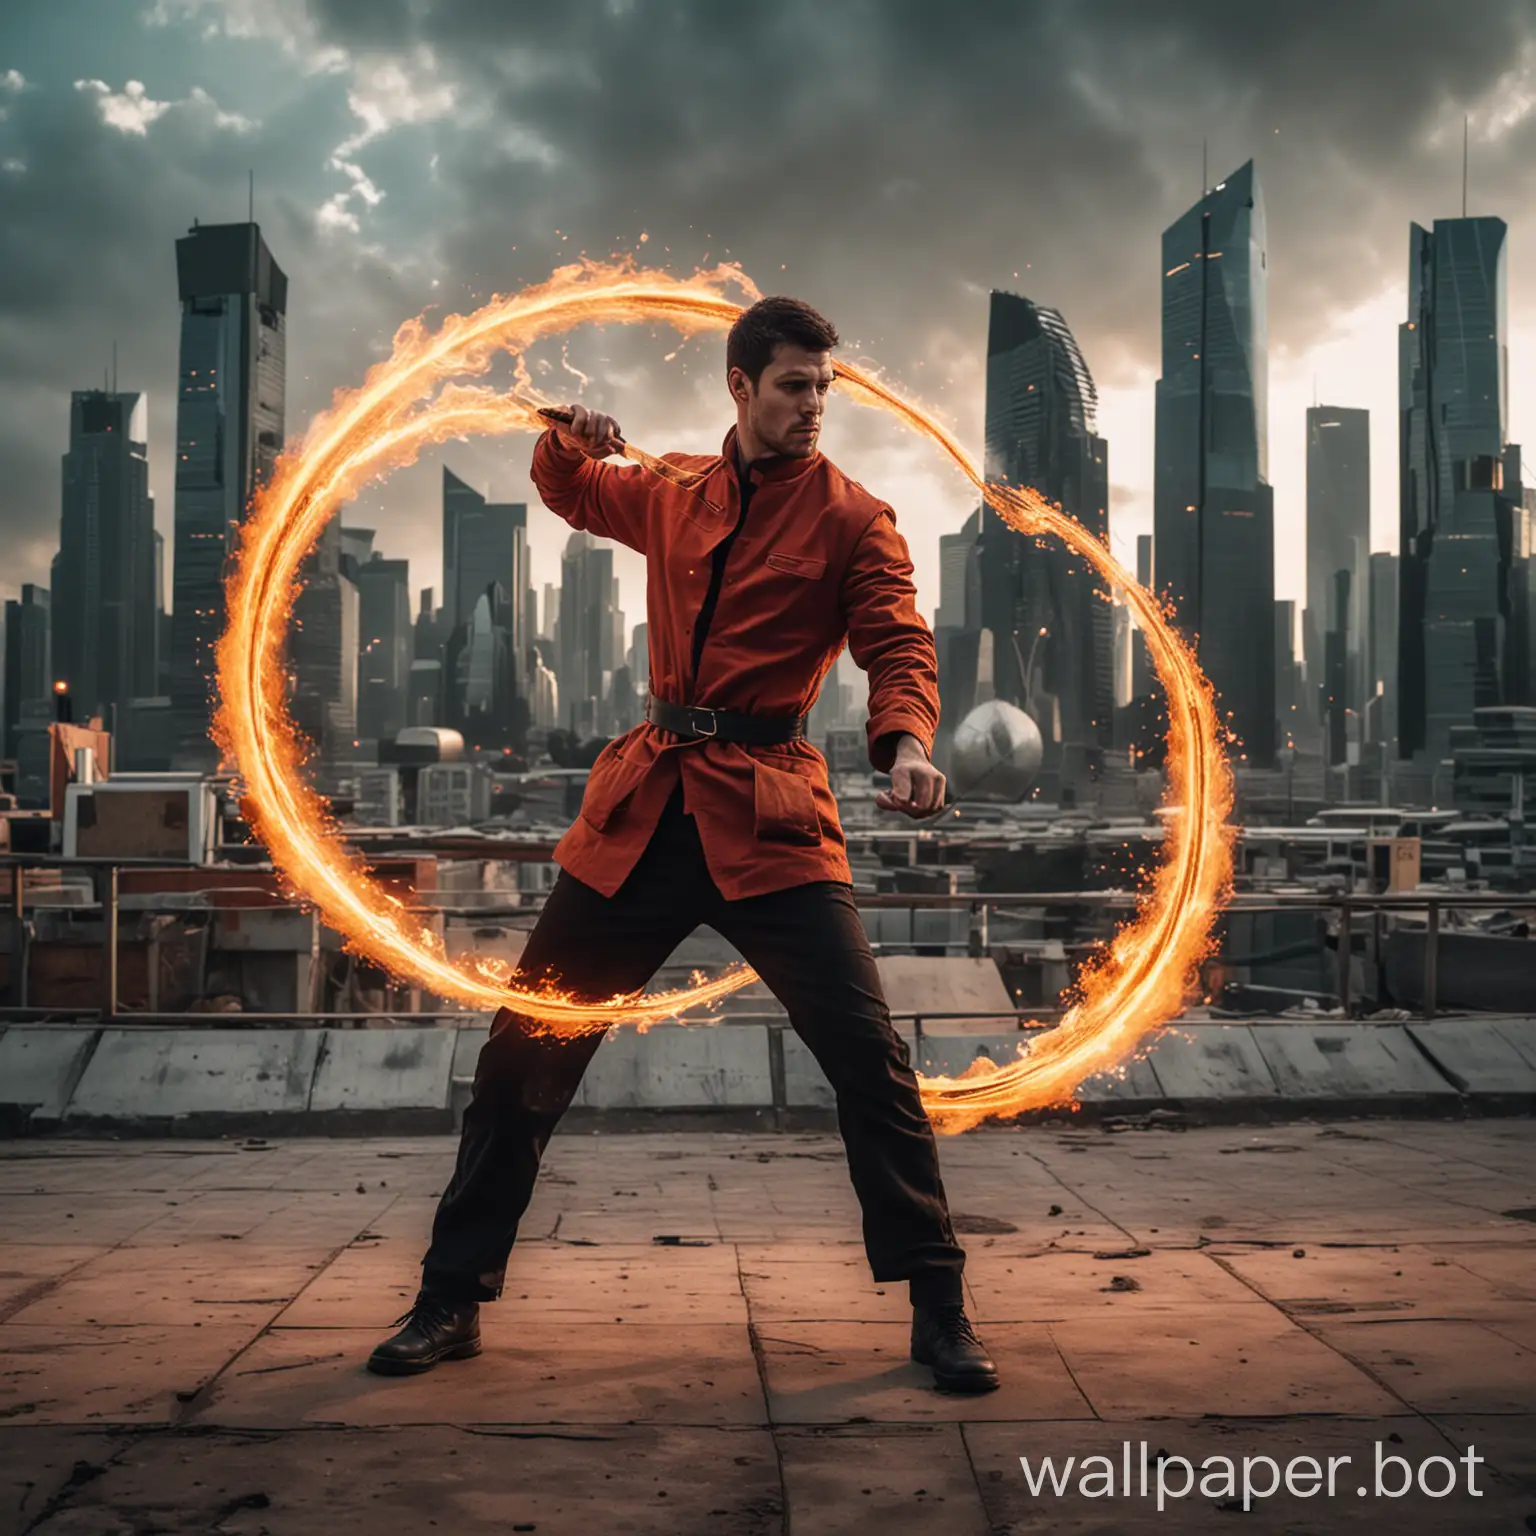 a man showing his skill of fire bending with futuristic city background